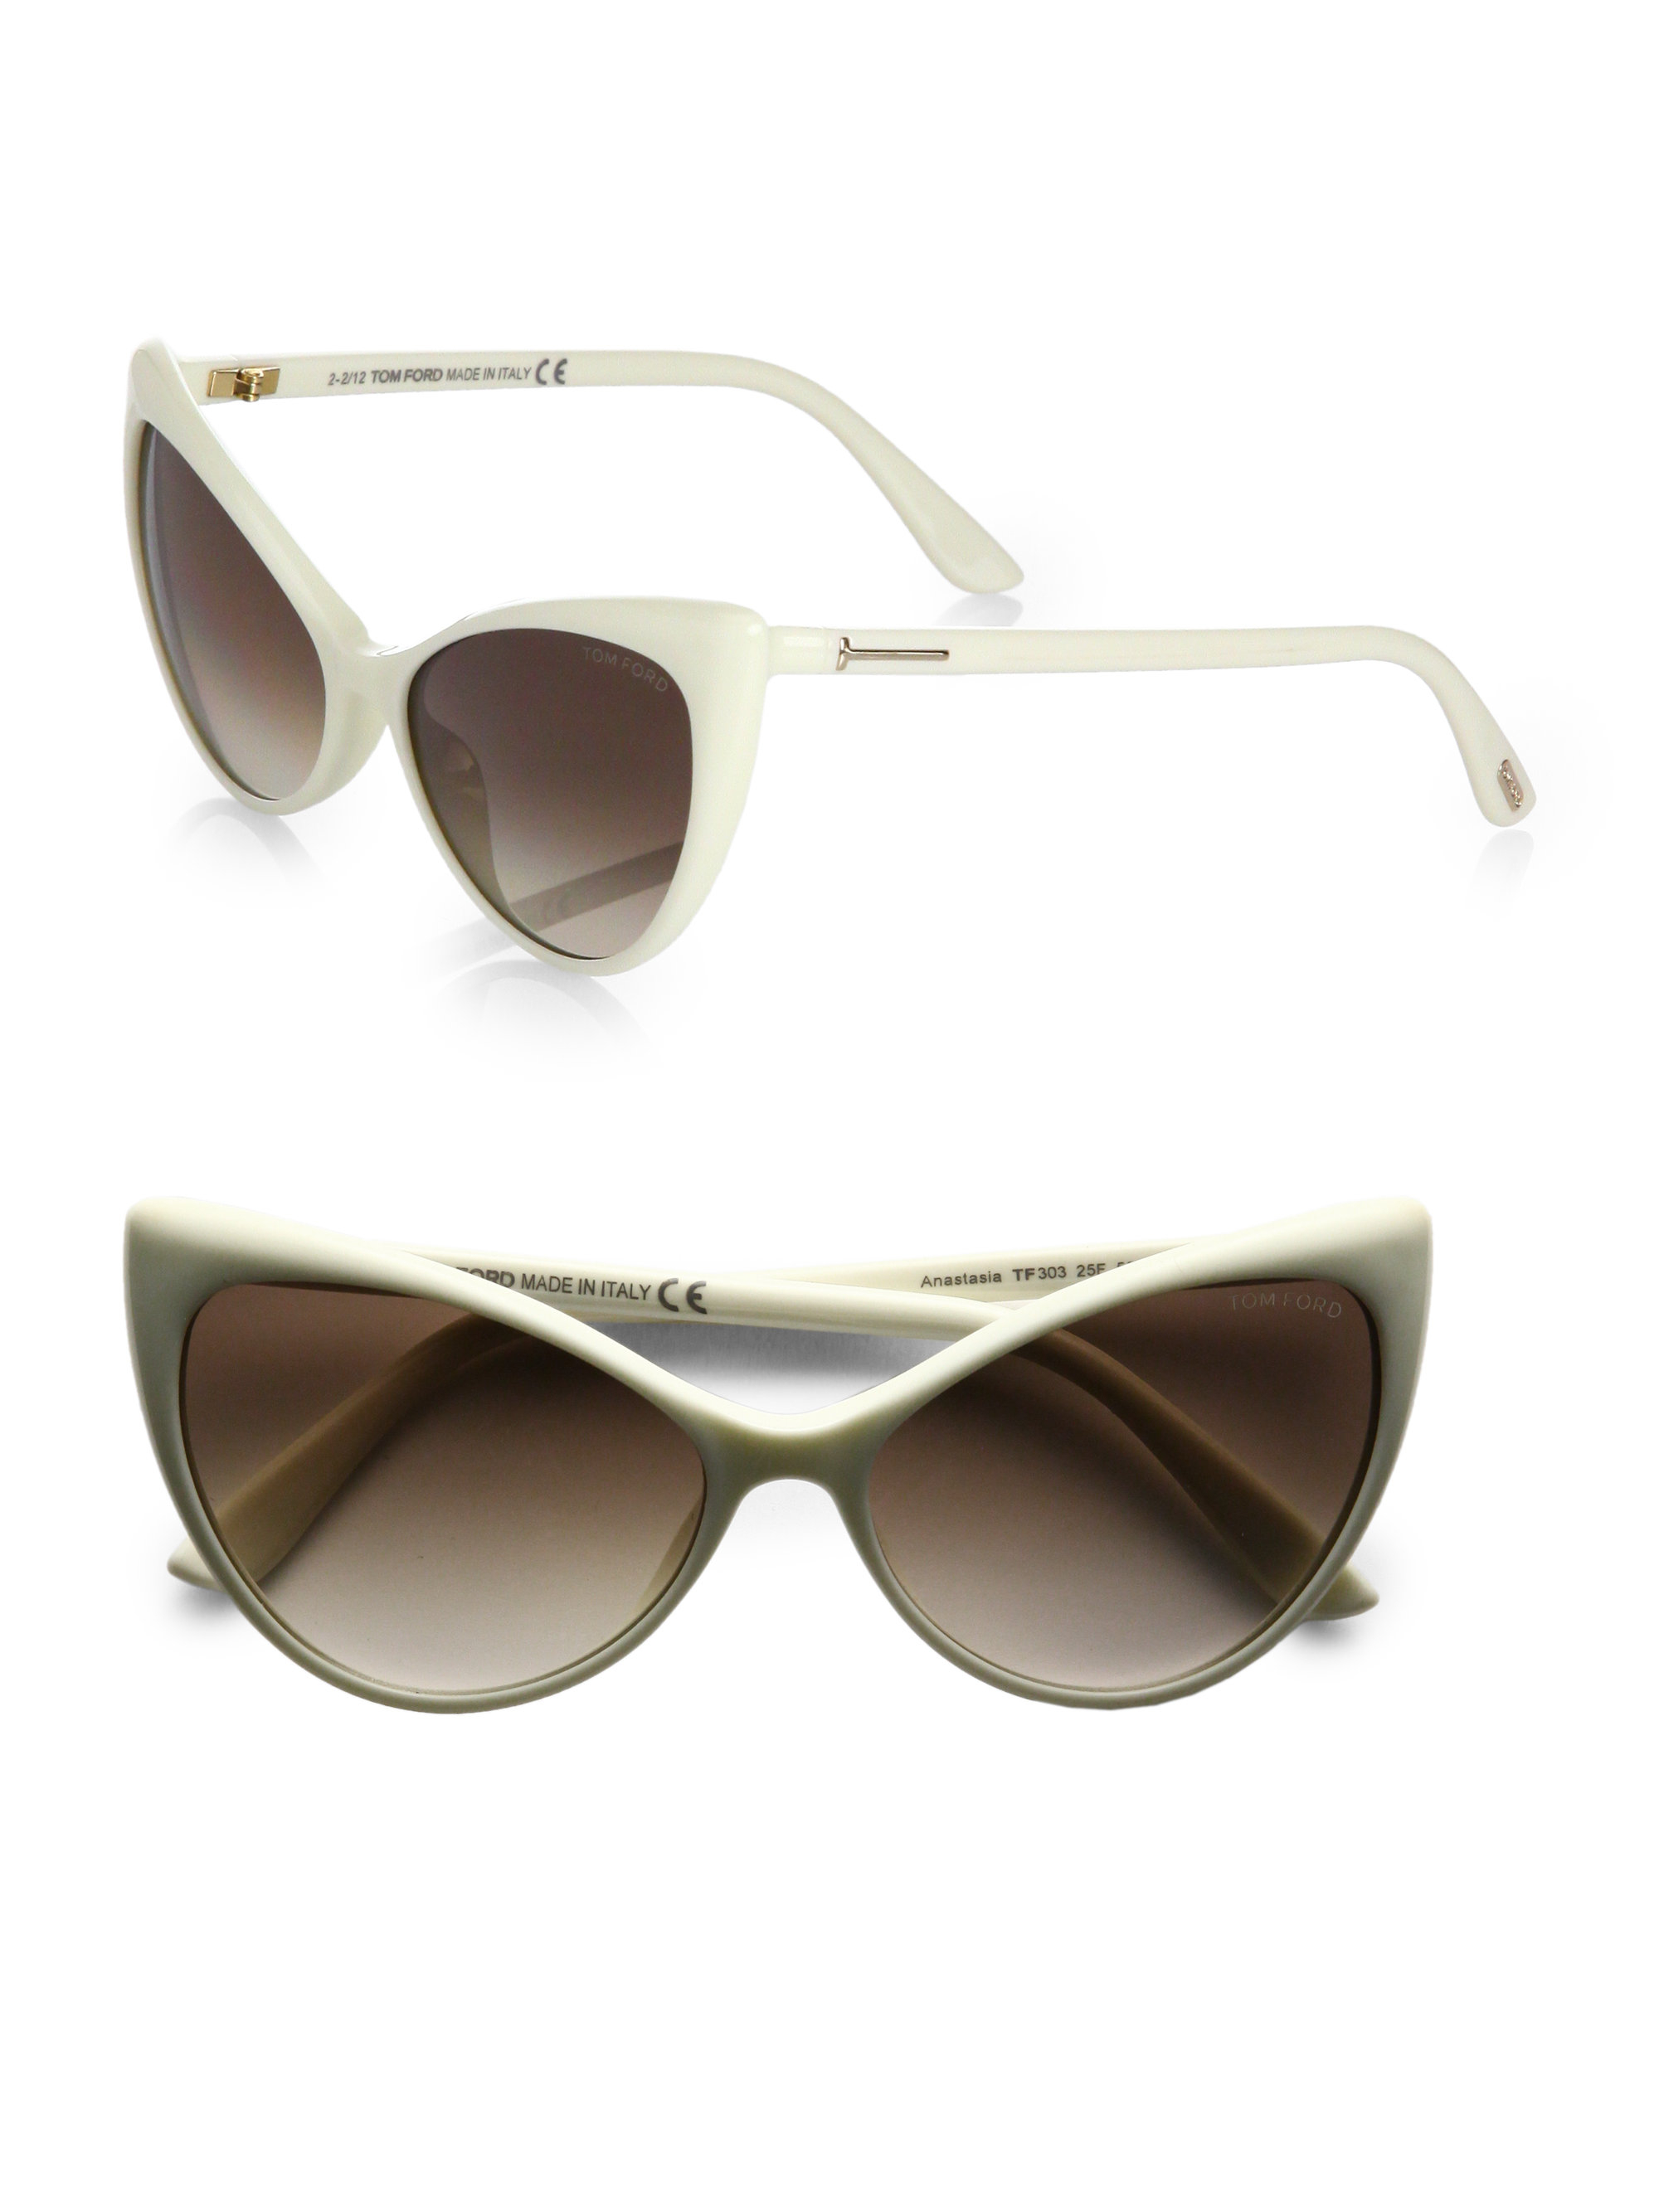 Lyst Tom Ford Cats Eye Sunglasses In White 